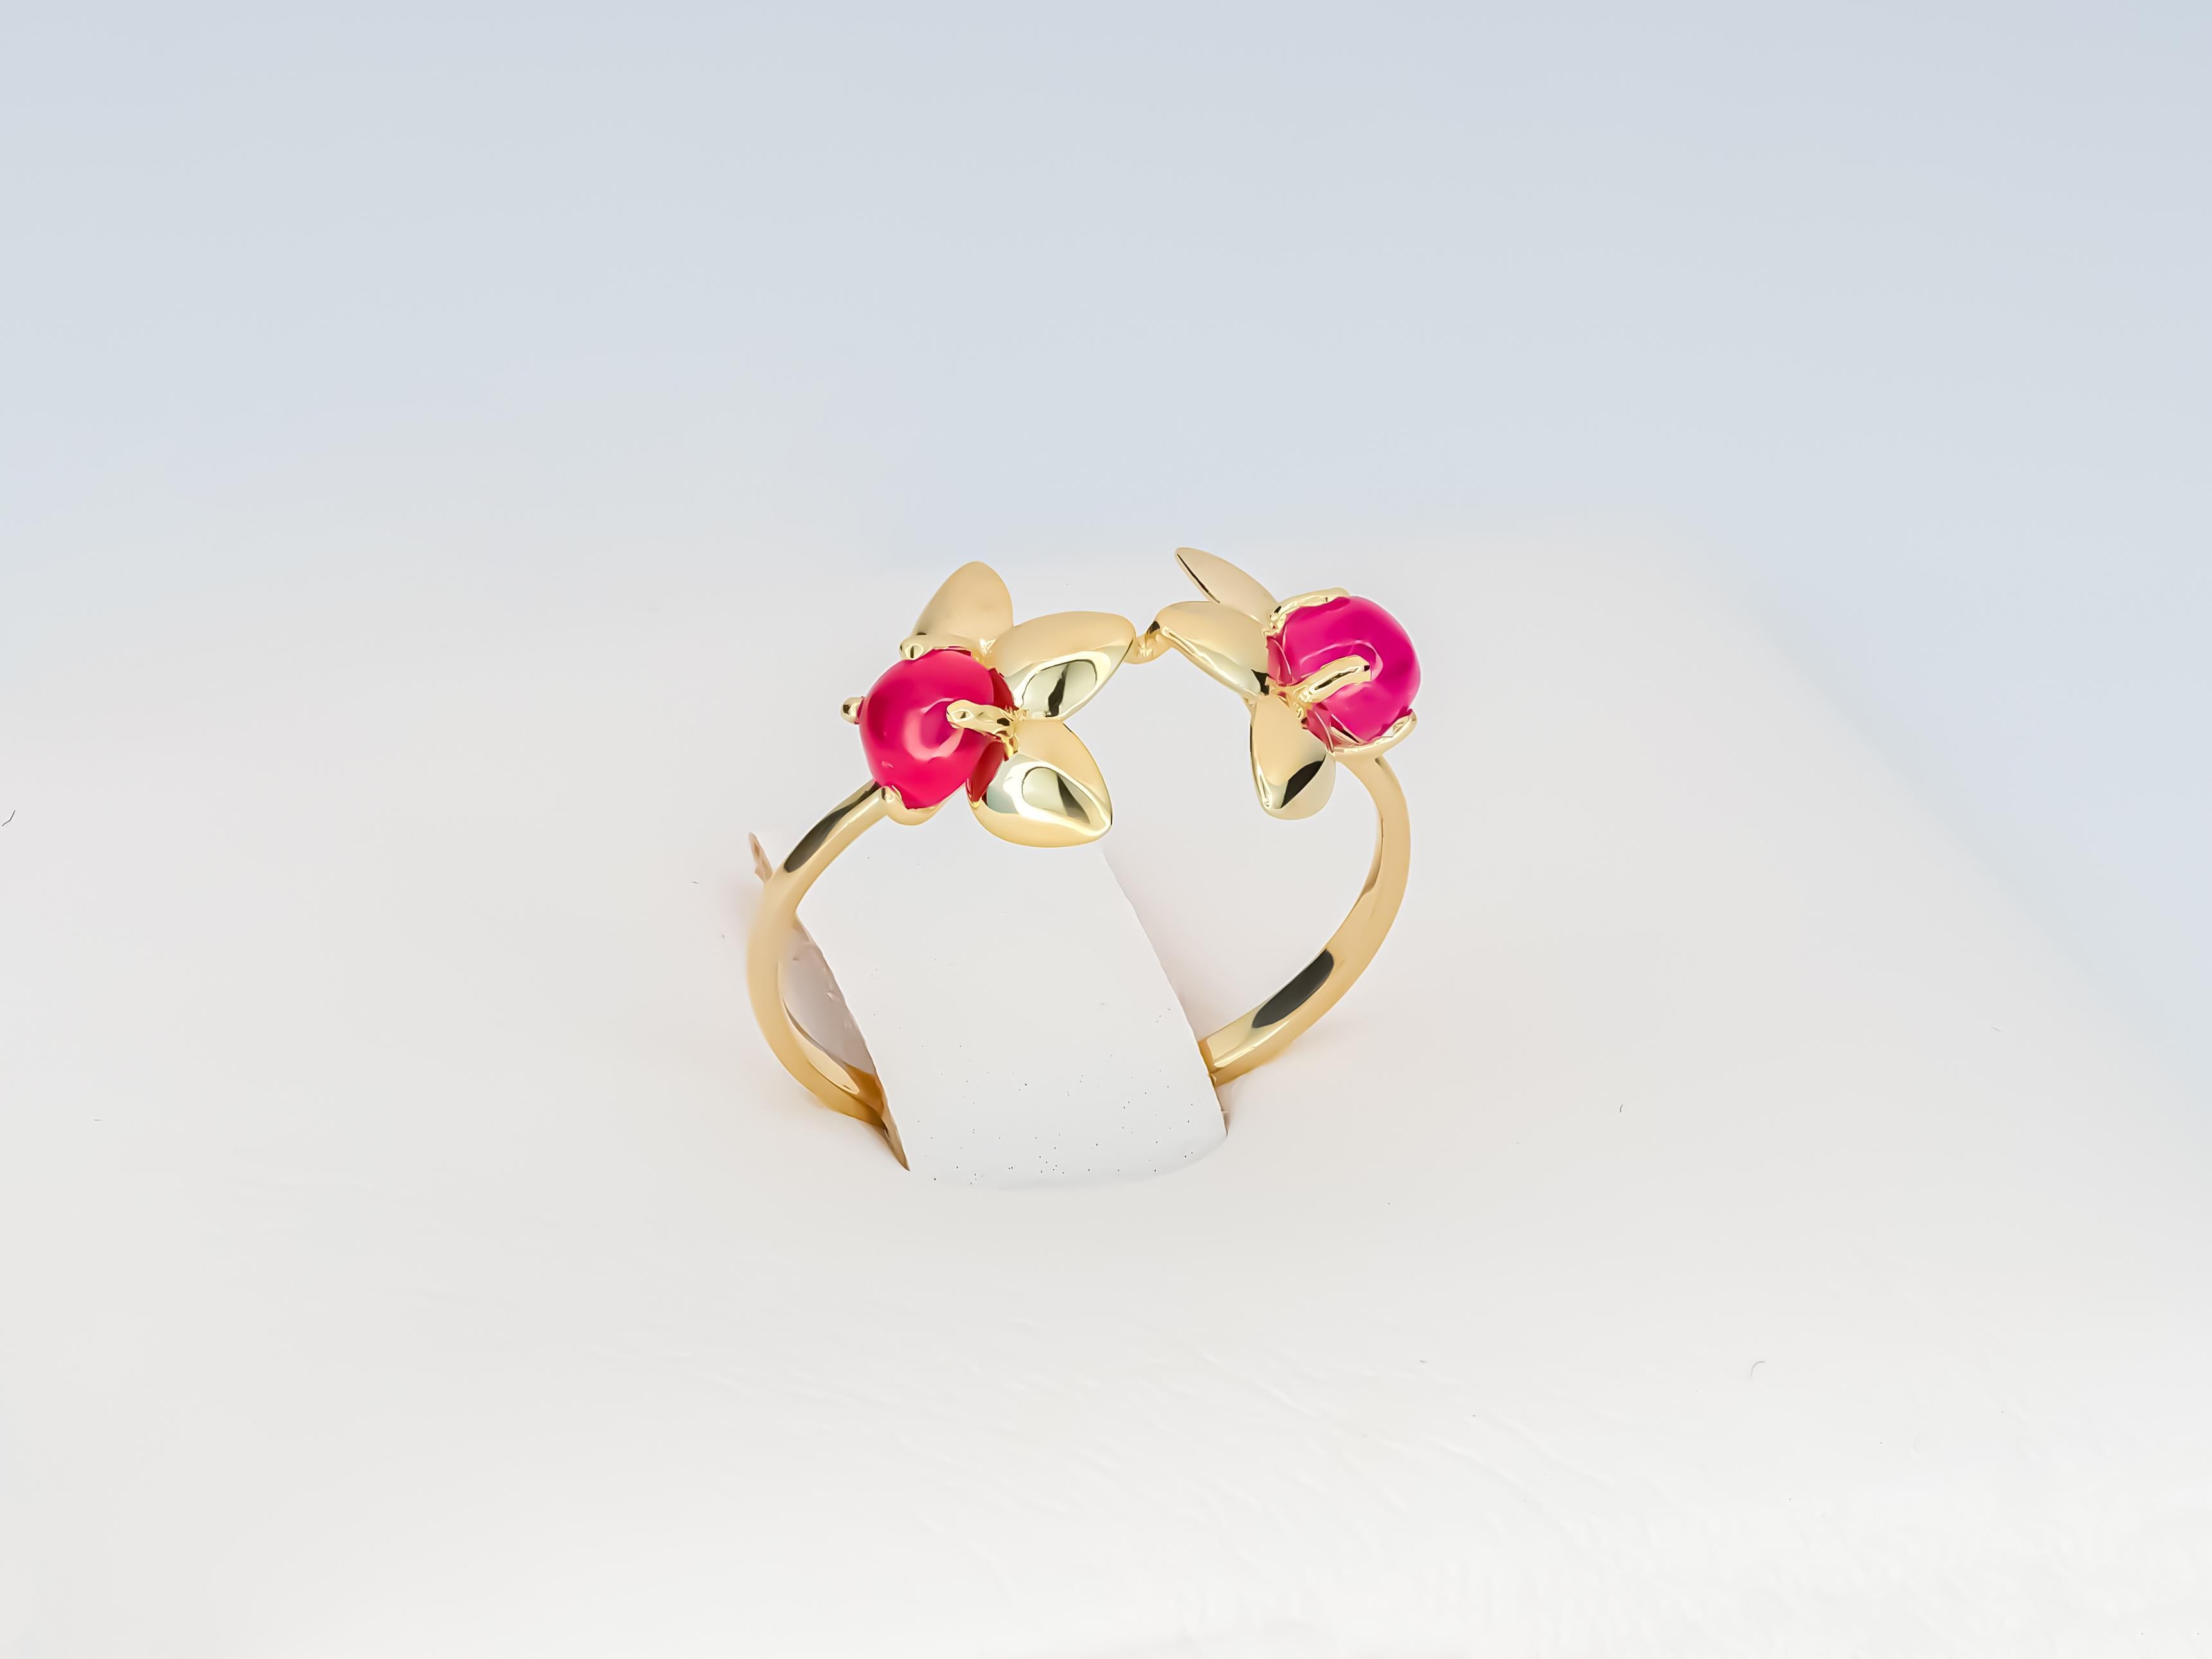 Cabochon 14 Karat Gold Ring with 2 Rubies, Flower Gold Ring, July Birthstone Ruby Ring For Sale